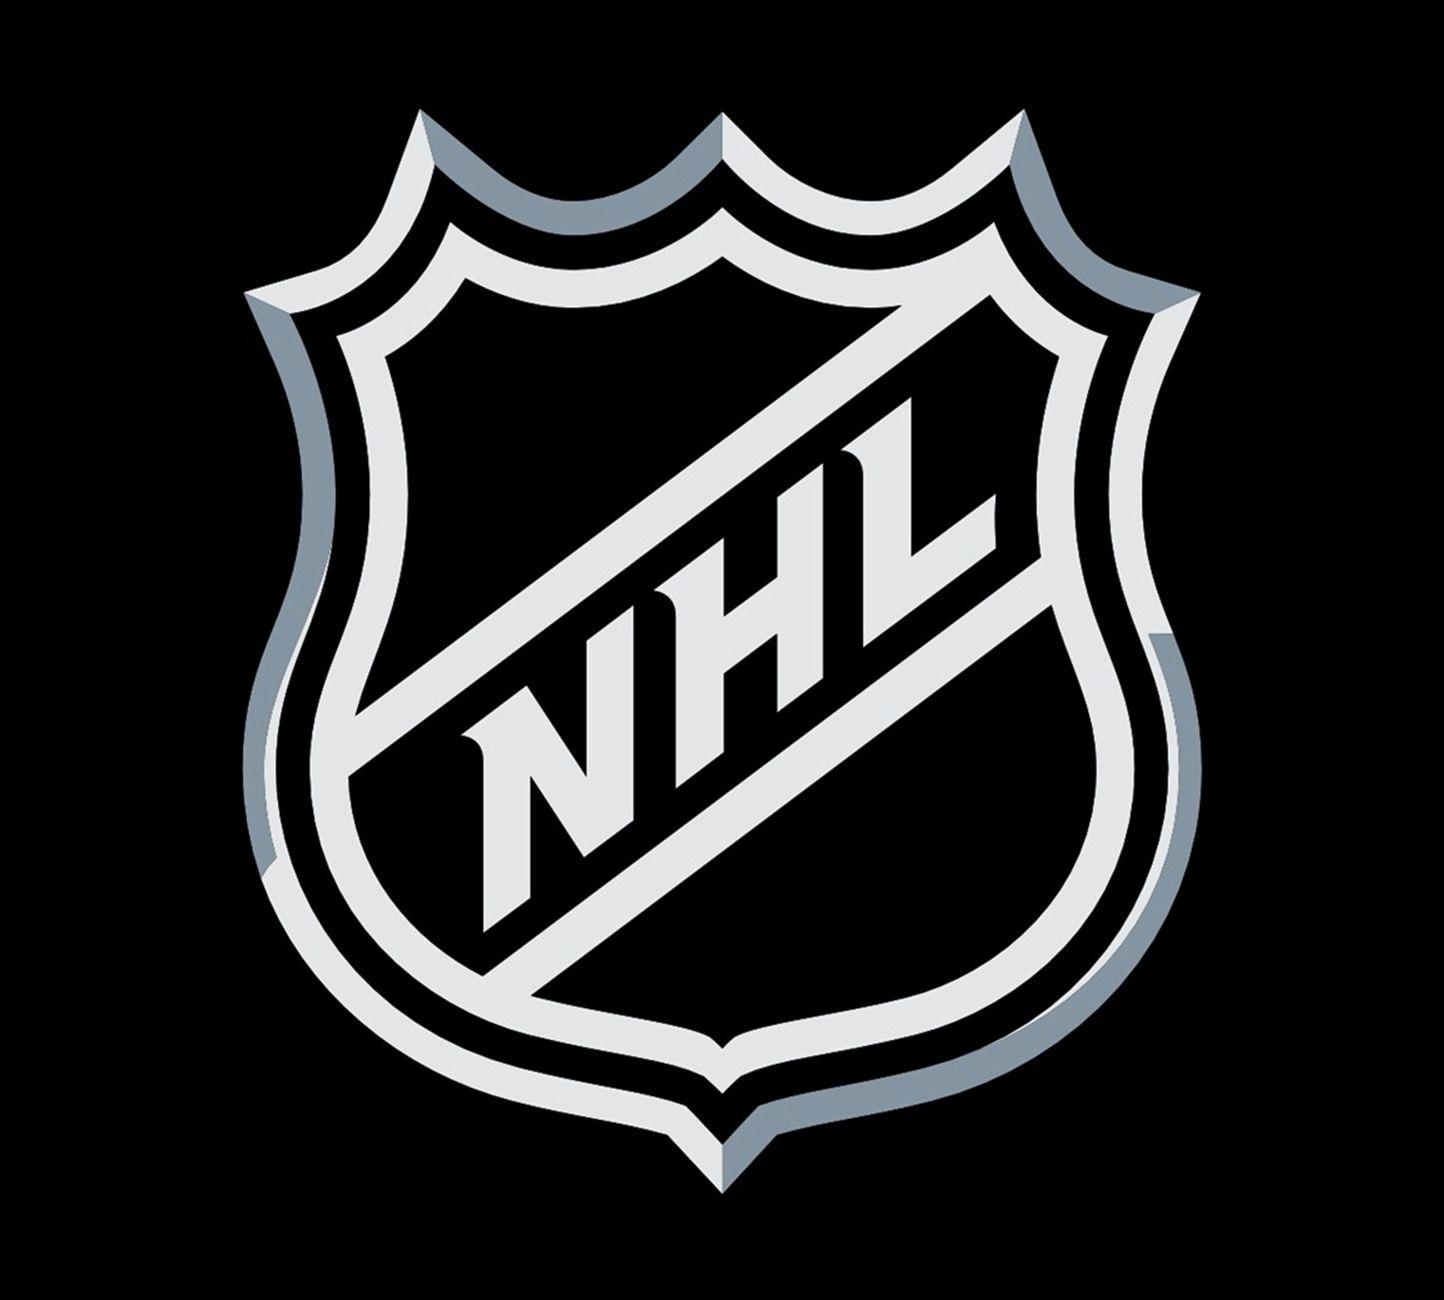 Current NHL Logo - NHL Logo, National Hockey League Symbol, Meaning, History and Evolution